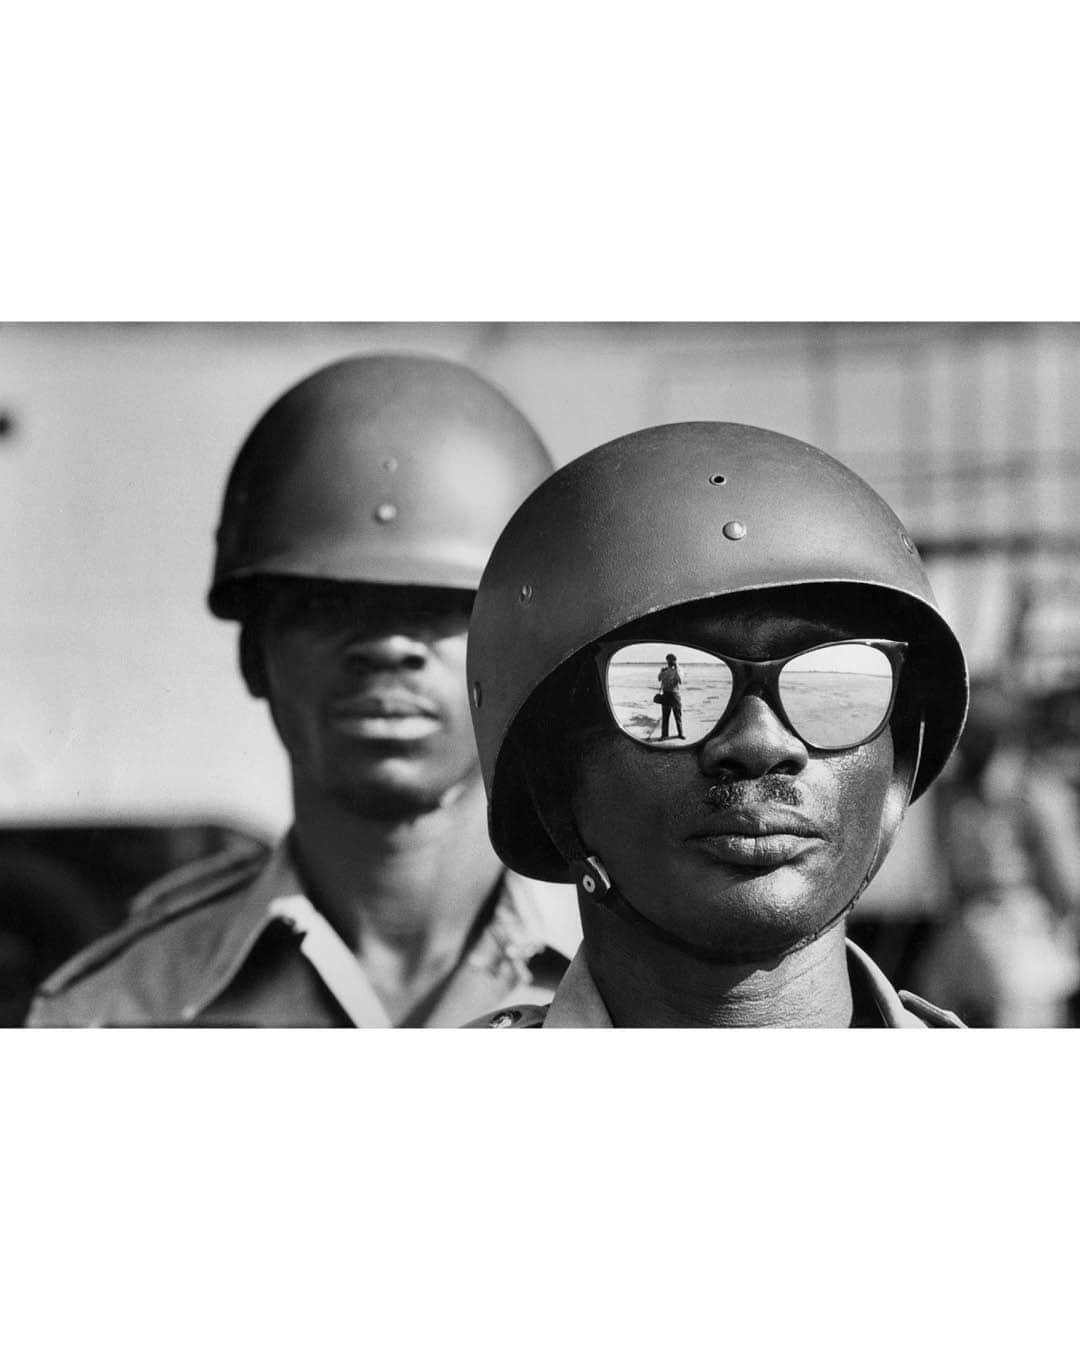 Magnum Photosさんのインスタグラム写真 - (Magnum PhotosInstagram)「100 Years of Marc Riboud 📸⁠ ⁠ Today, June 24, marks one hundred years since the birth of French photographer Marc Riboud, who was invited by Henri Cartier-Bresson and Robert Capa to join Magnum Photos after his photograph of a painter on the Eiffel Tower appeared in Life Magazine in 1953. ⁠ ⁠ “I have always been more sensitive to the beauty of the world than to its violence and monsters. My obsession has been with photographing life at its most intense, as intensely as possible,” Riboud wrote in the essay “Pleasures of the Eye” (2000).⁠ ⁠ In Riboud's photographs, the people, their daily struggles and resilience take center stage – a lasting testament to his singular, empathetic view of the world. ⁠ ⁠ 🔗 At the link in bio, we celebrate the life and work of the French photographer. ⁠ ⁠ PHOTOS (left to right):⁠ ⁠ (1) Zazou, the Eiffel tower's painter. Paris. France. 1953. ⁠ ⁠ (2) Self-portrait. Leopoldville airport. Congo. 1961.⁠ ⁠ (3) An American young girl, Jan Rose Kasmir, confronts the American National Guard outside the Pentagon during the 1967 anti-Vietnam march. This march helped to turn public opinion against the US war in Vietnam. Washington DC. USA. 1967. ⁠ ⁠ (4) The Great Wall. Hebei Province. China. 1971.⁠ ⁠ (5) Moscow. USSR. 1960.⁠ ⁠ (6) A tribal munitions factory near Kohat Pass on Afghanistan's lawless border with Pakistan. Afghanistan. 1956.⁠ ⁠ (7) Independence. Algeria. July 2, 1962.⁠ ⁠ (8) Moslem praying towards Mecca at Rub al Khali in the deserts of Saudi Arabia. 1974.⁠ ⁠ (9) After bathing in the Ganges. Bénarès. Uttar Pradesh. India. 1956.⁠ ⁠ (10) American architect Ieoh Ming Pei in the east wing of the National Gallery that he designed. Washington DC. USA. 1978. ⁠ ⁠ © Marc Riboud / Fonds Marc Riboud au MNAAG / Magnum Photos」6月25日 0時20分 - magnumphotos